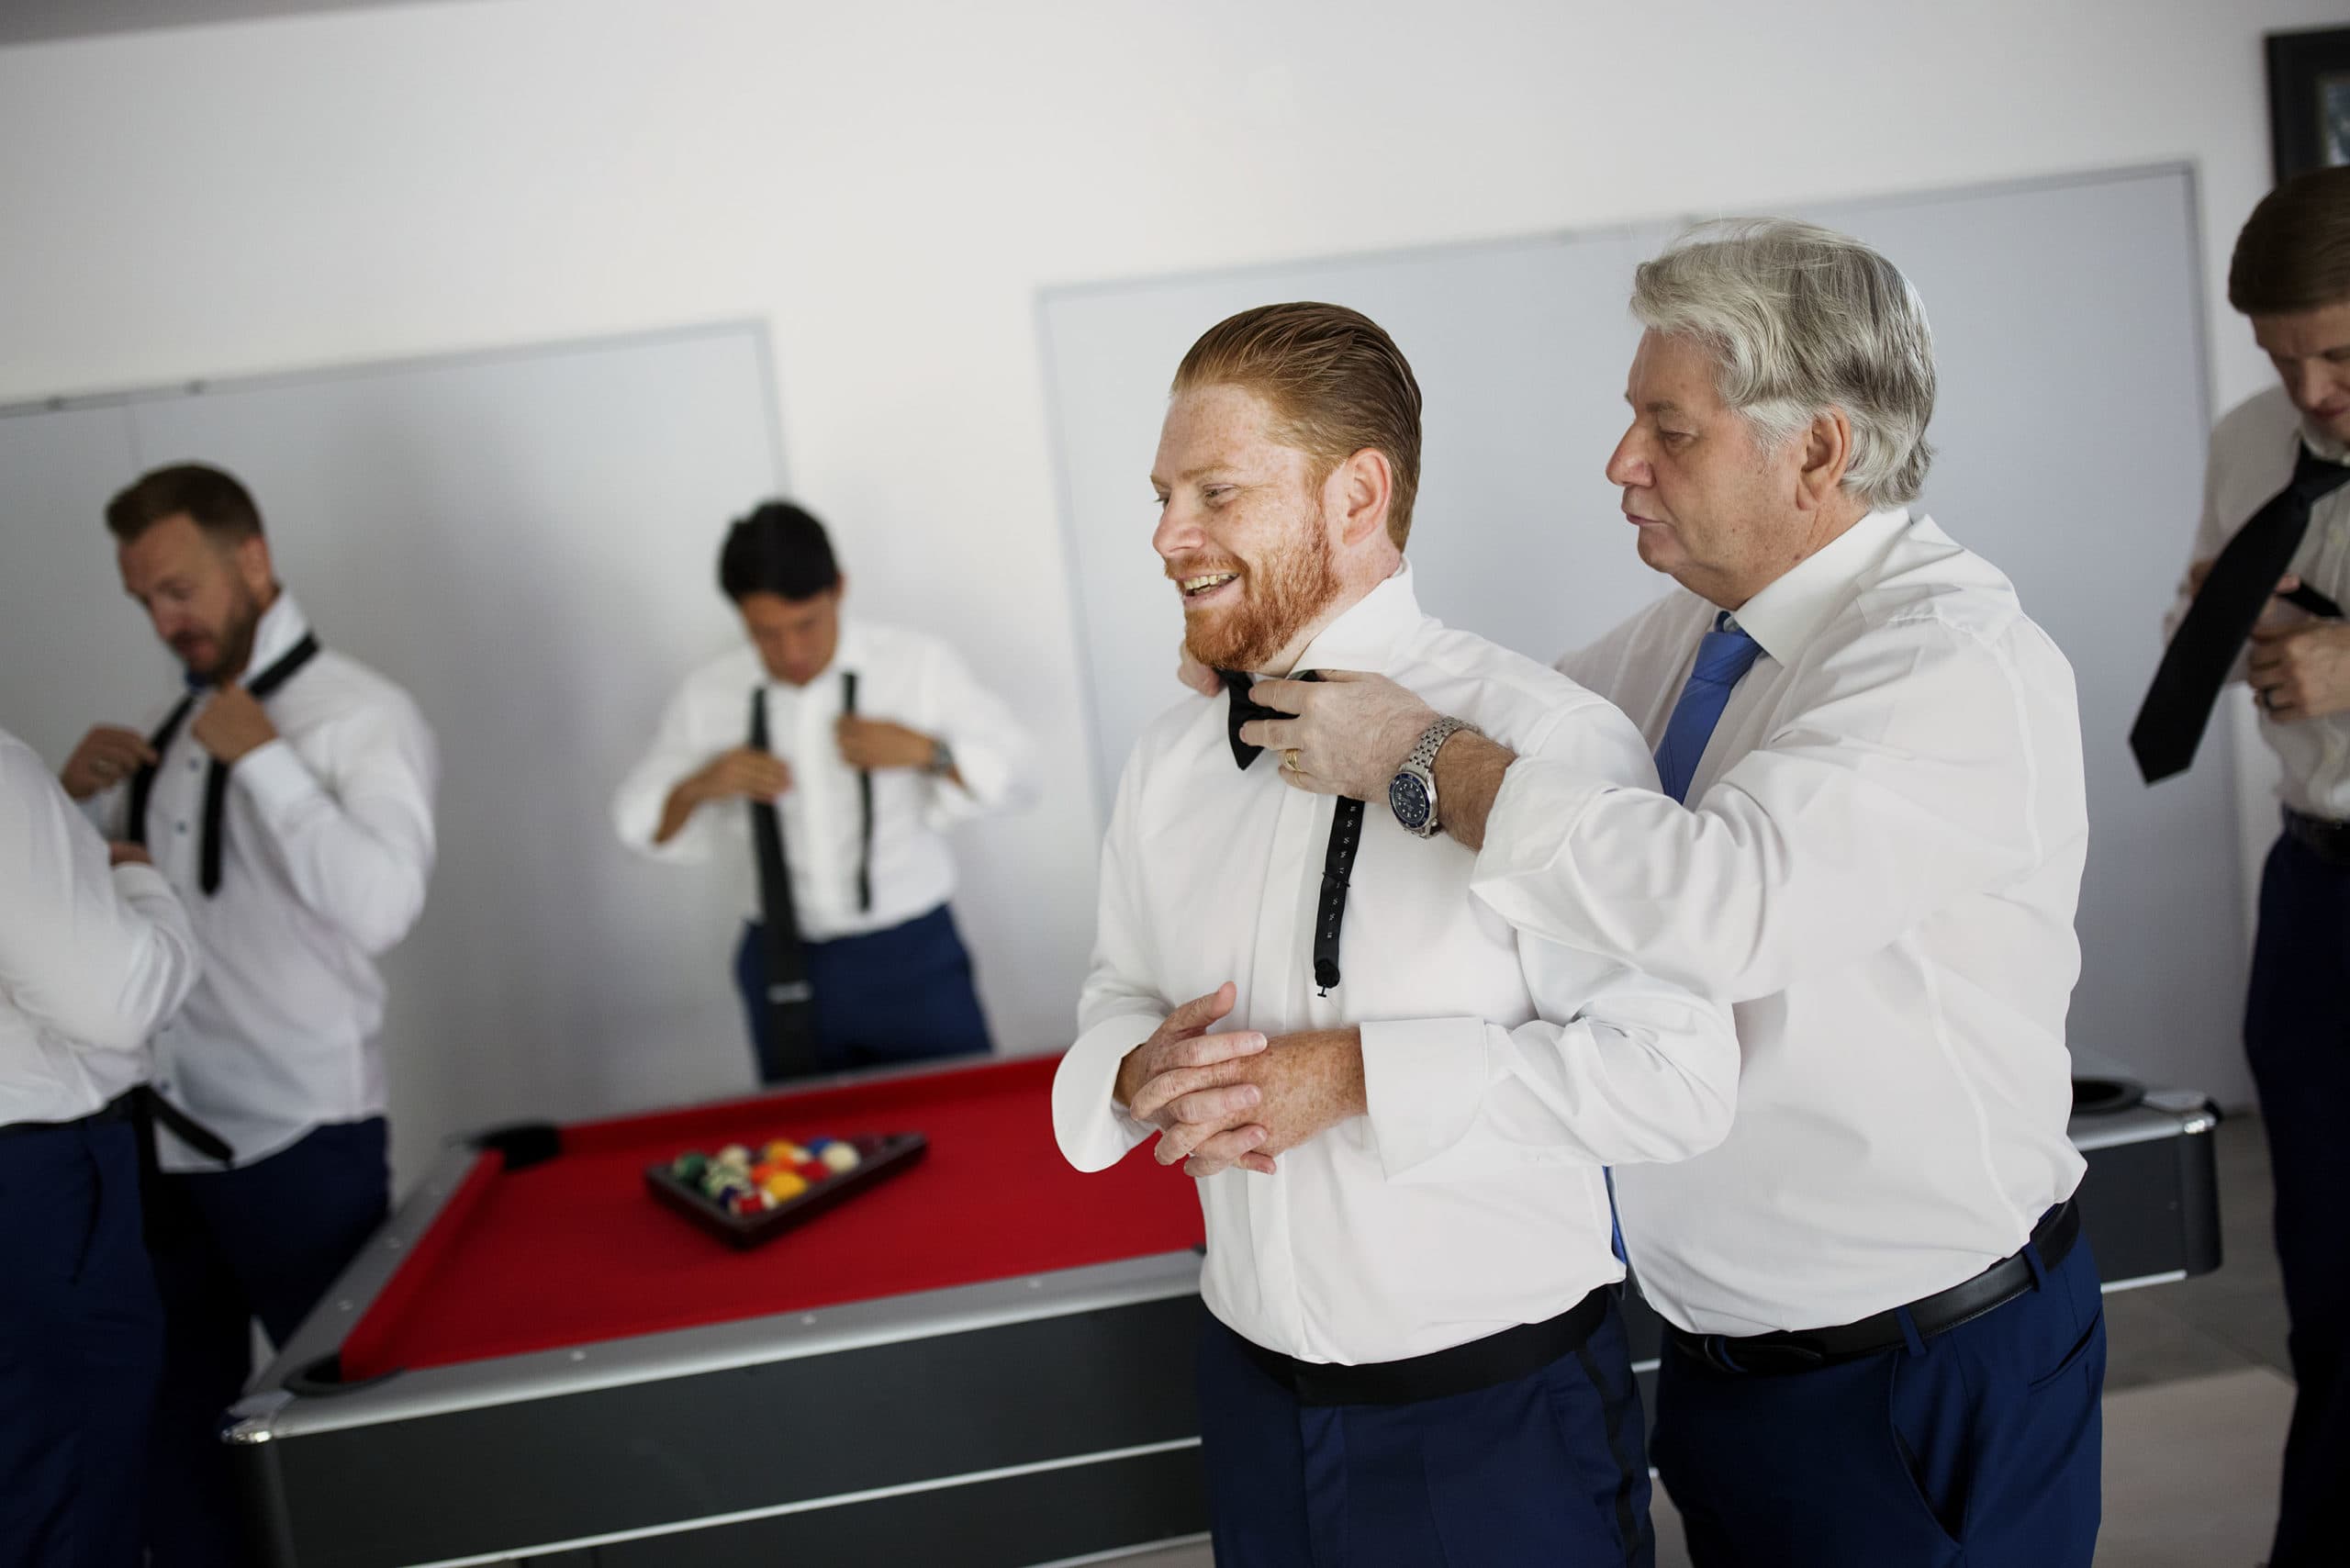 The groom gets some help with his tie